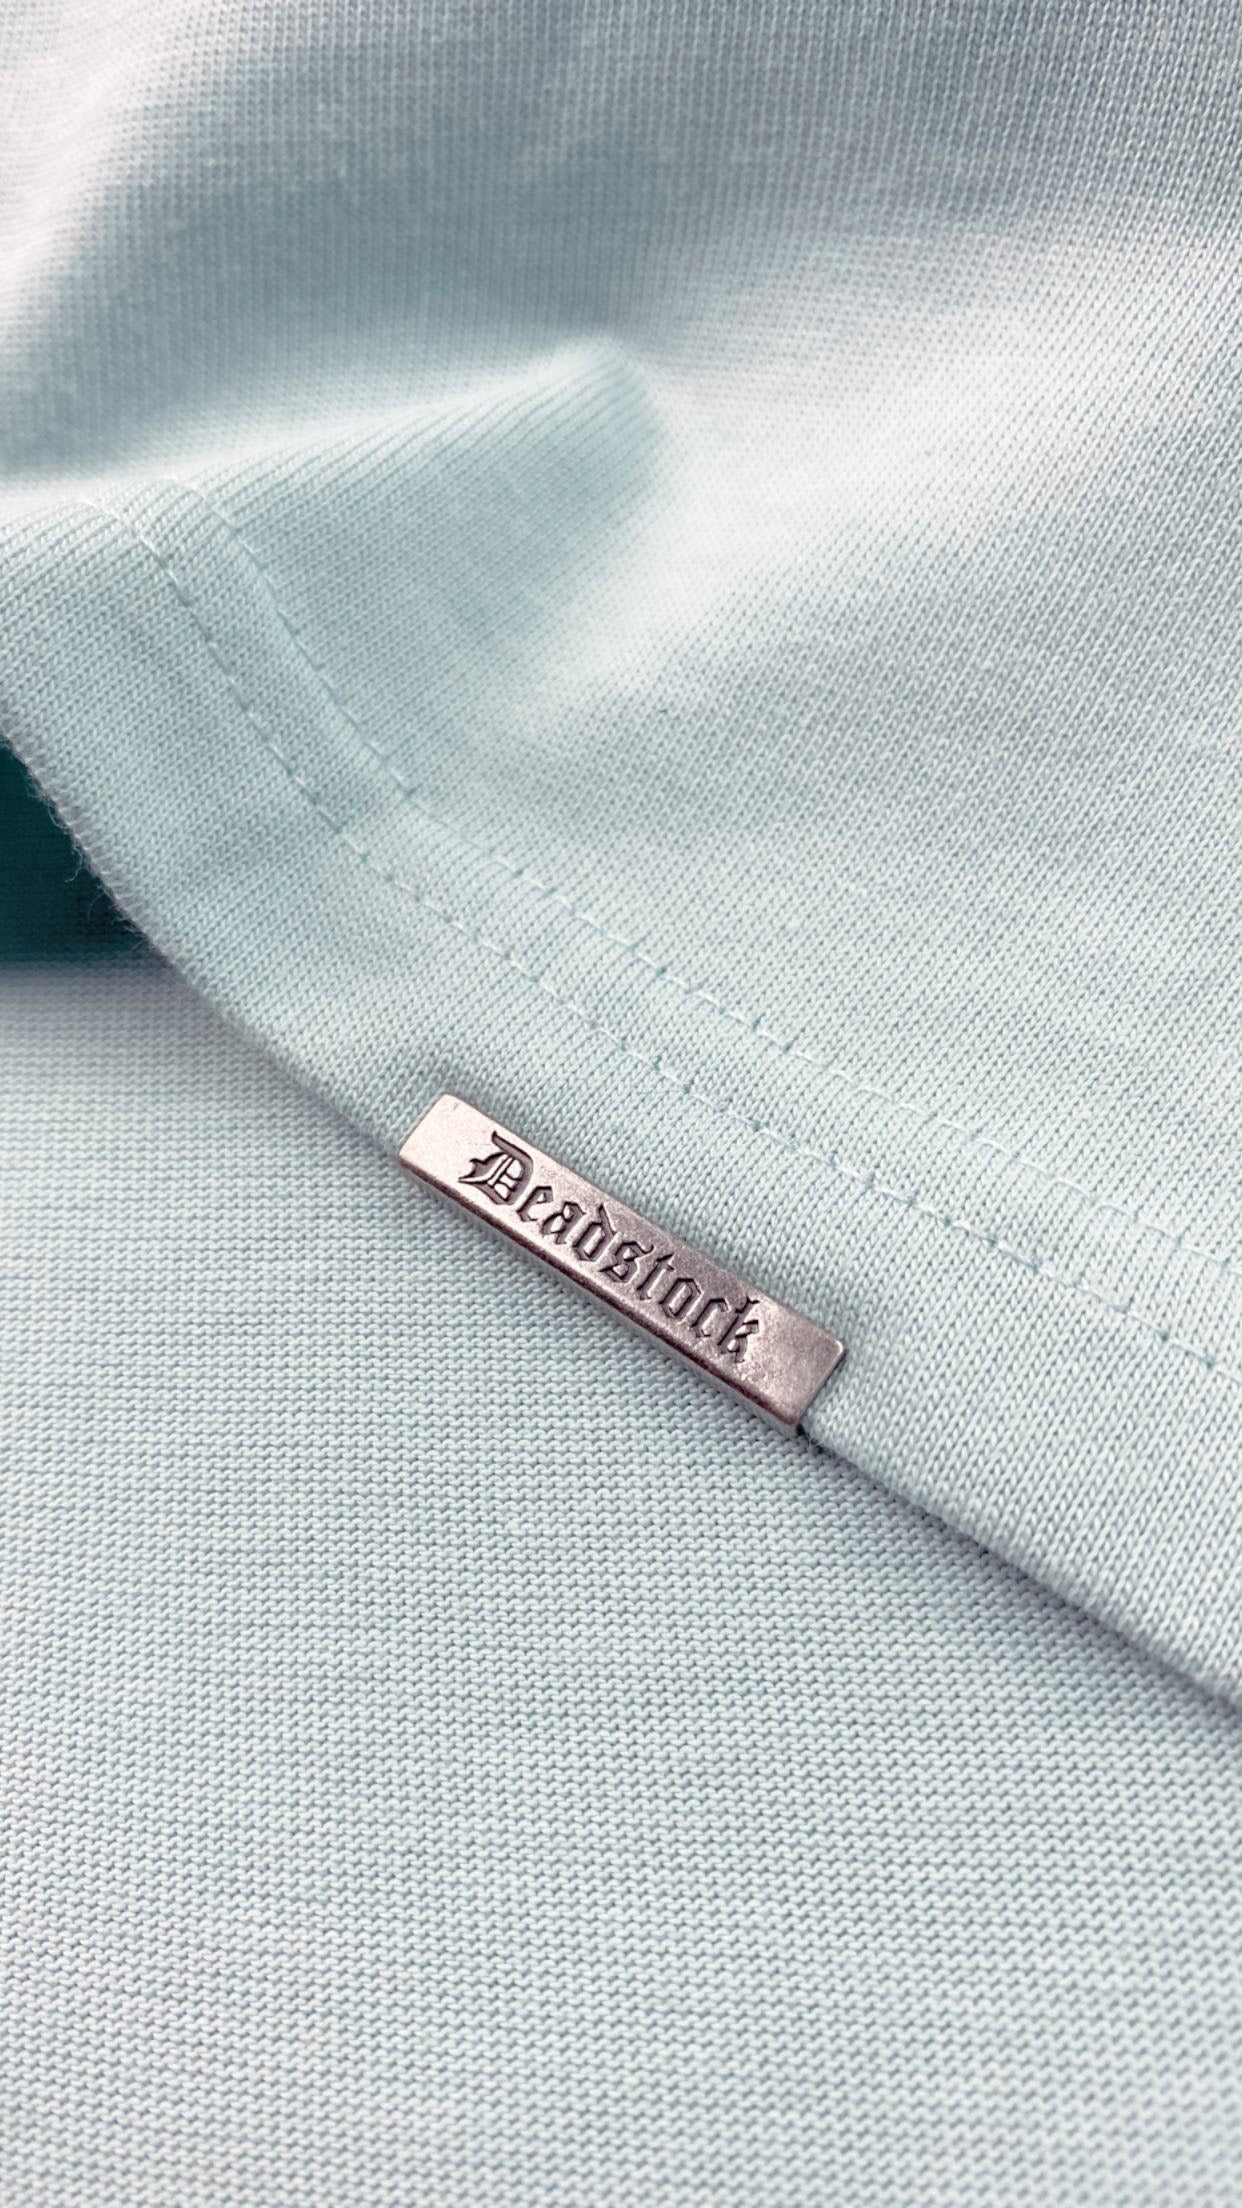 A blue t-shirt with a metal tag saying deadstock clamped to the rib of the shirt